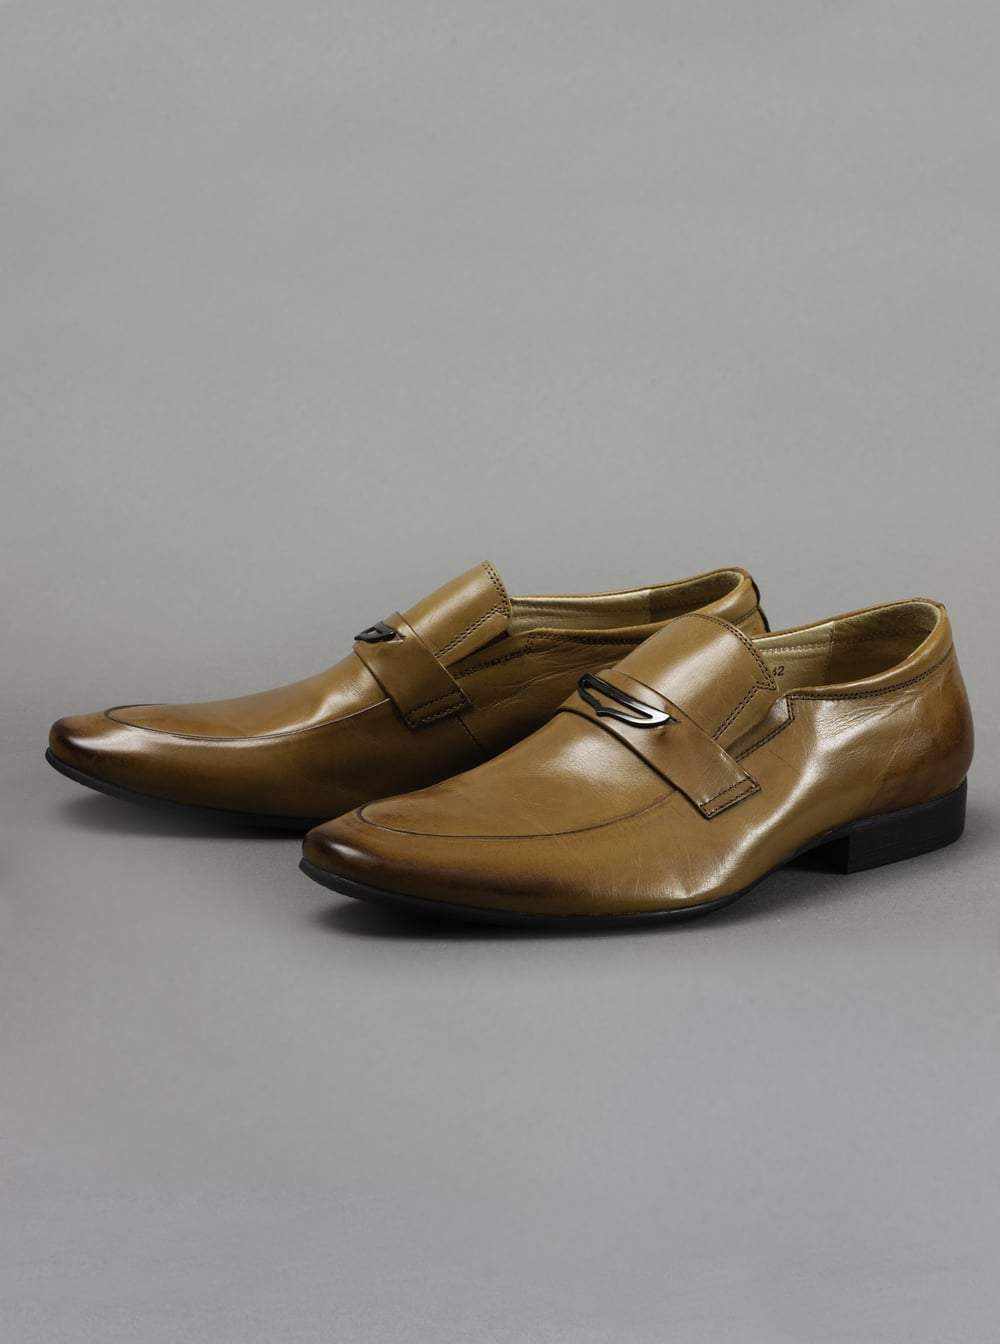 Tan Loafer Shoes